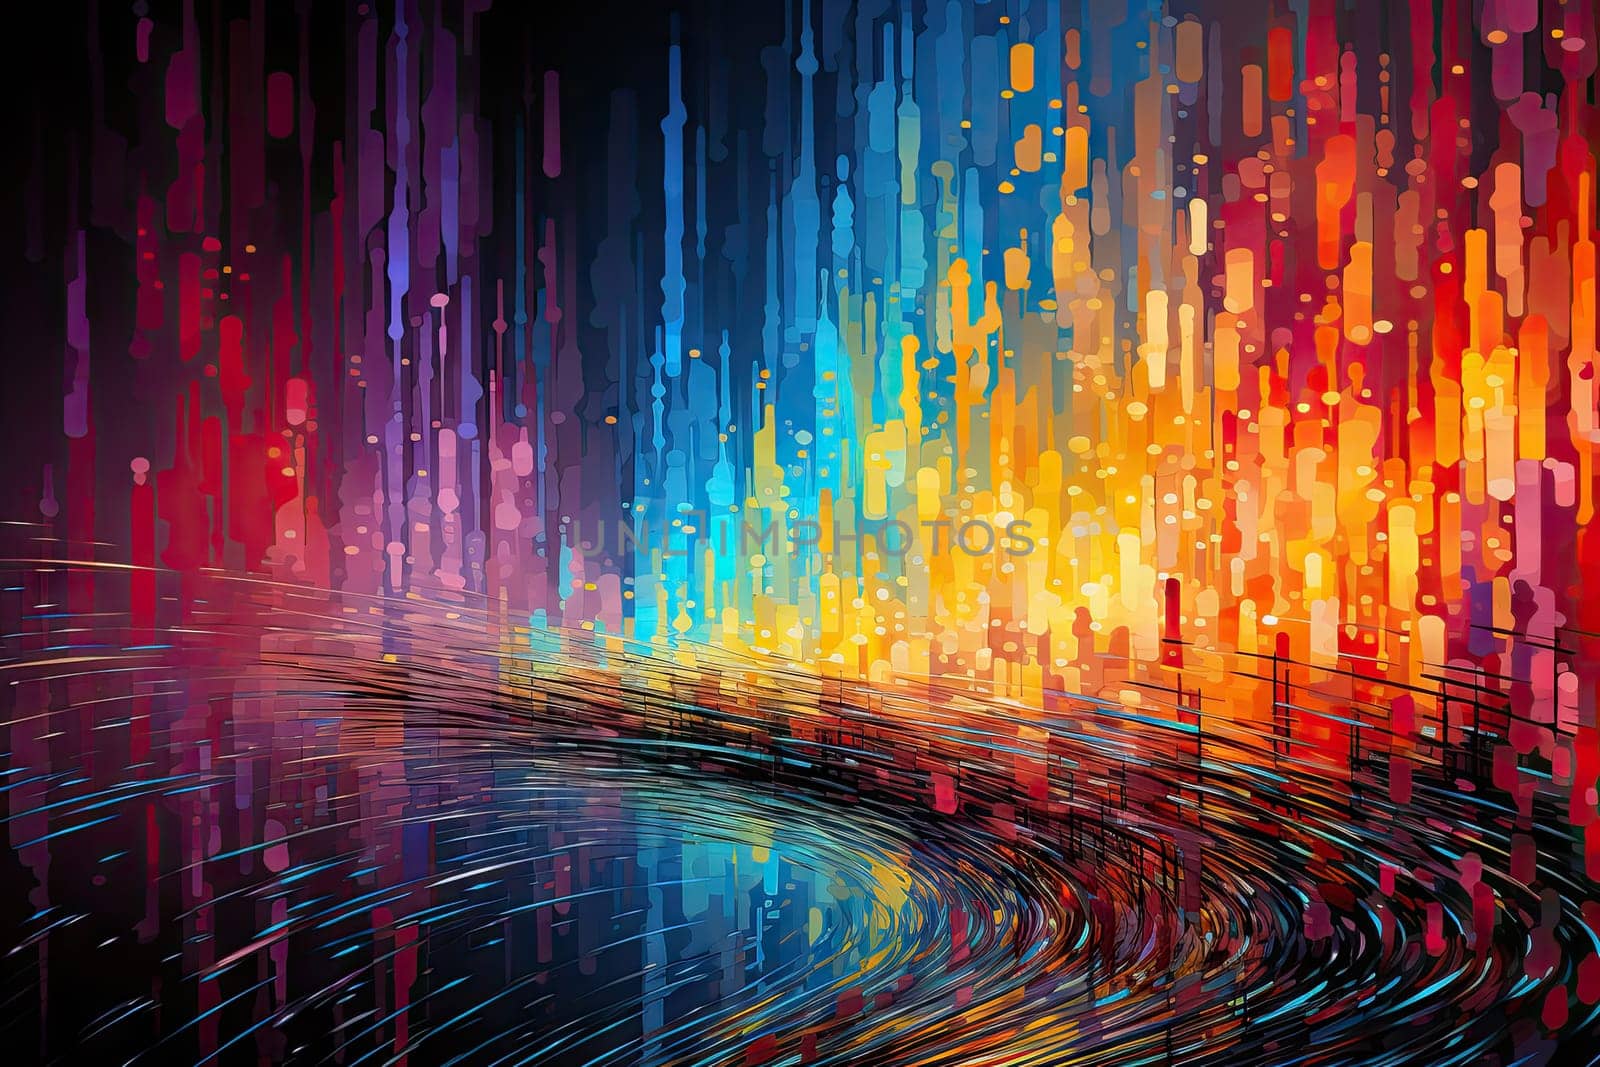 A Vibrant Symphony of Colors and Patterns Unleashed on an Abstract Canvas